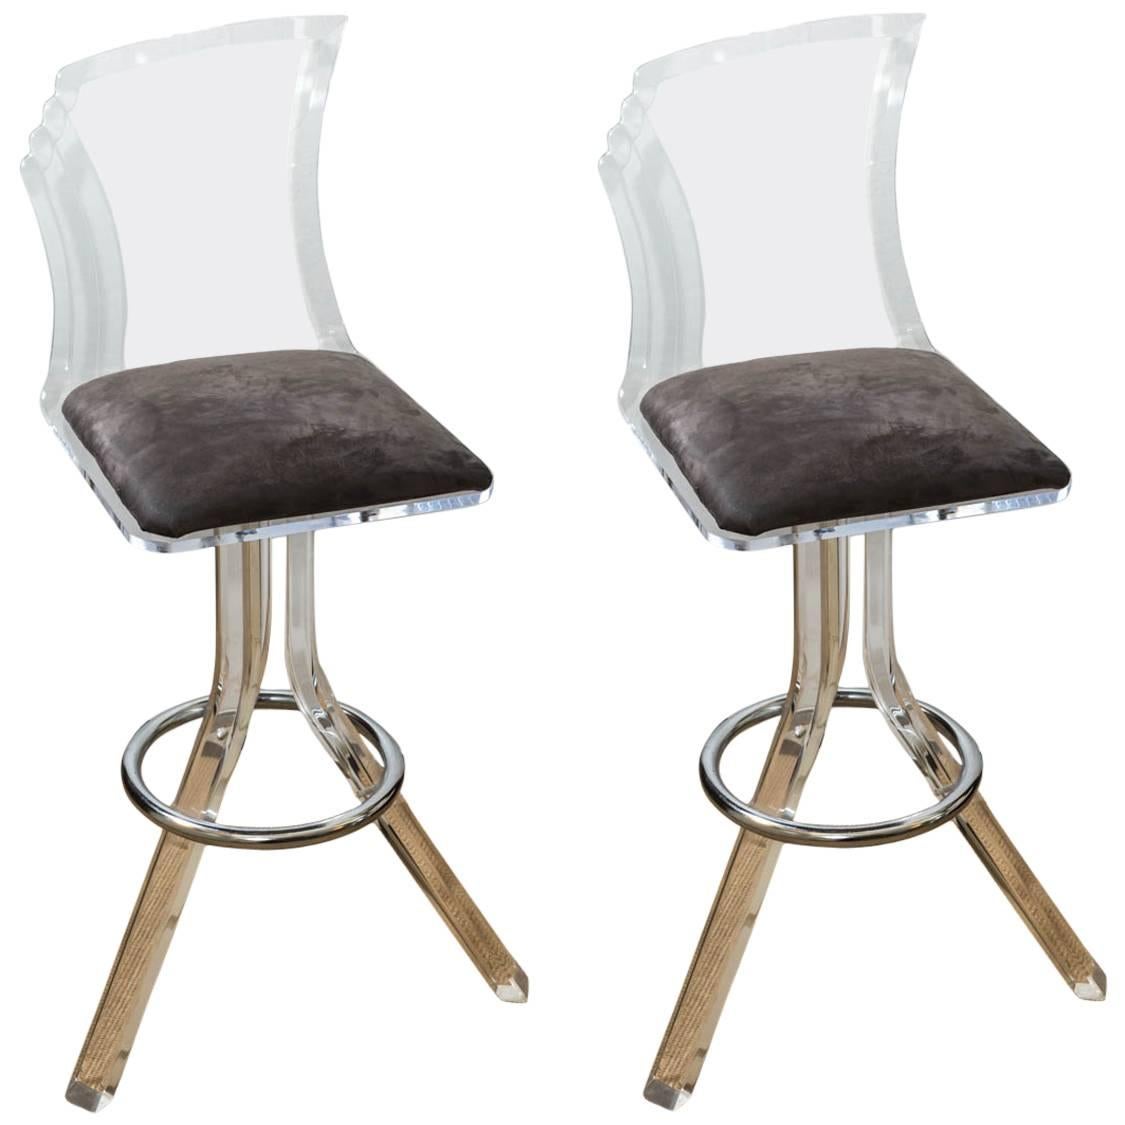 Attractive Pair of Mid-Century Lucite and Chrome Bar Stools